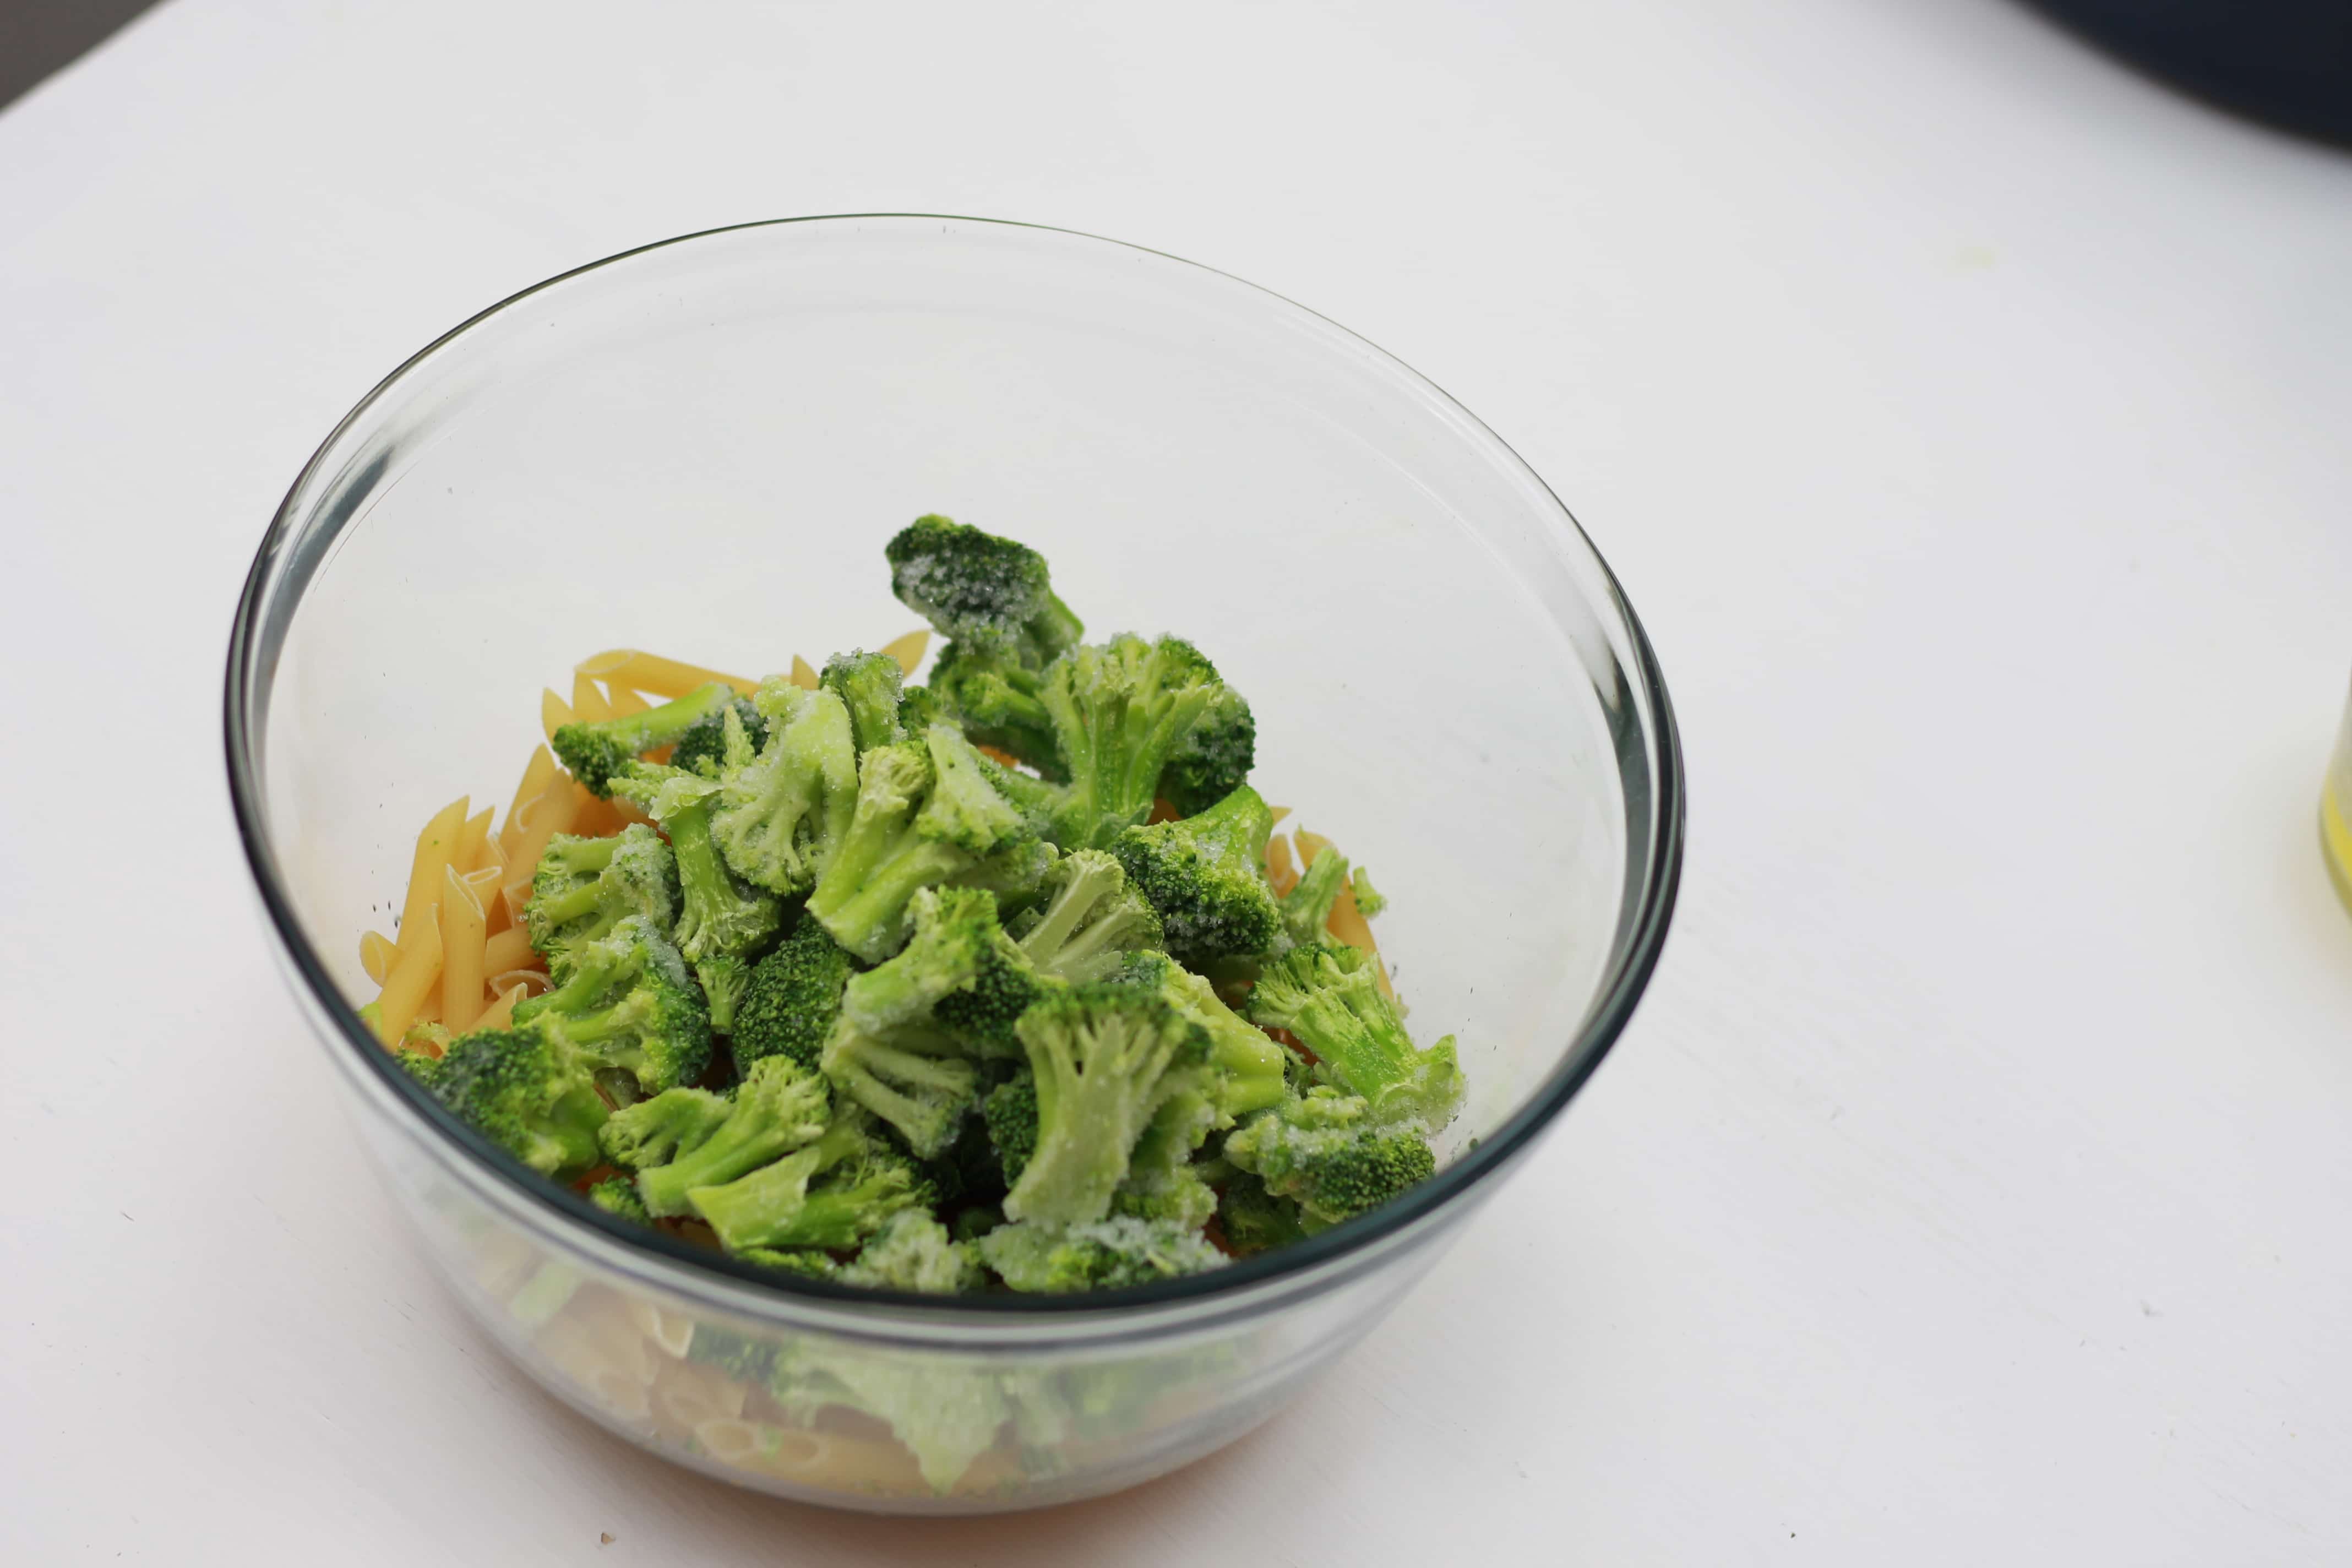 Frozen broccoli, and shredded cheese in a clear bowl.